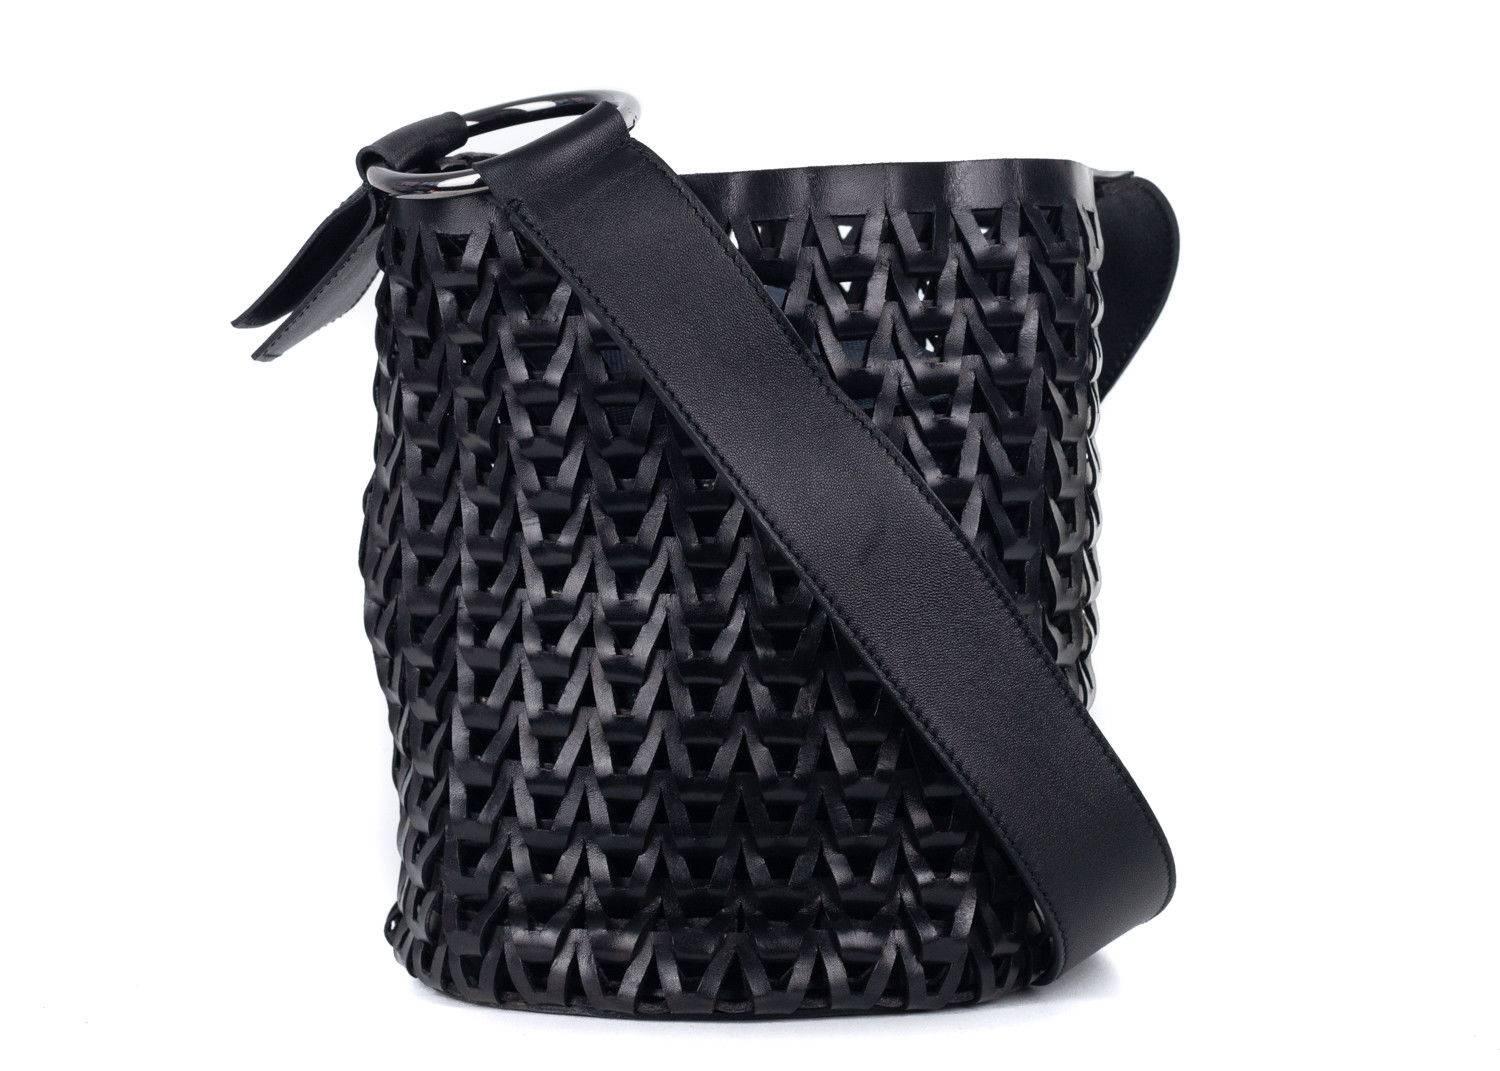 Roberto Cavalli Solid Black Leather Braided Woven Shoulder Bucket Bag In New Condition For Sale In Brooklyn, NY